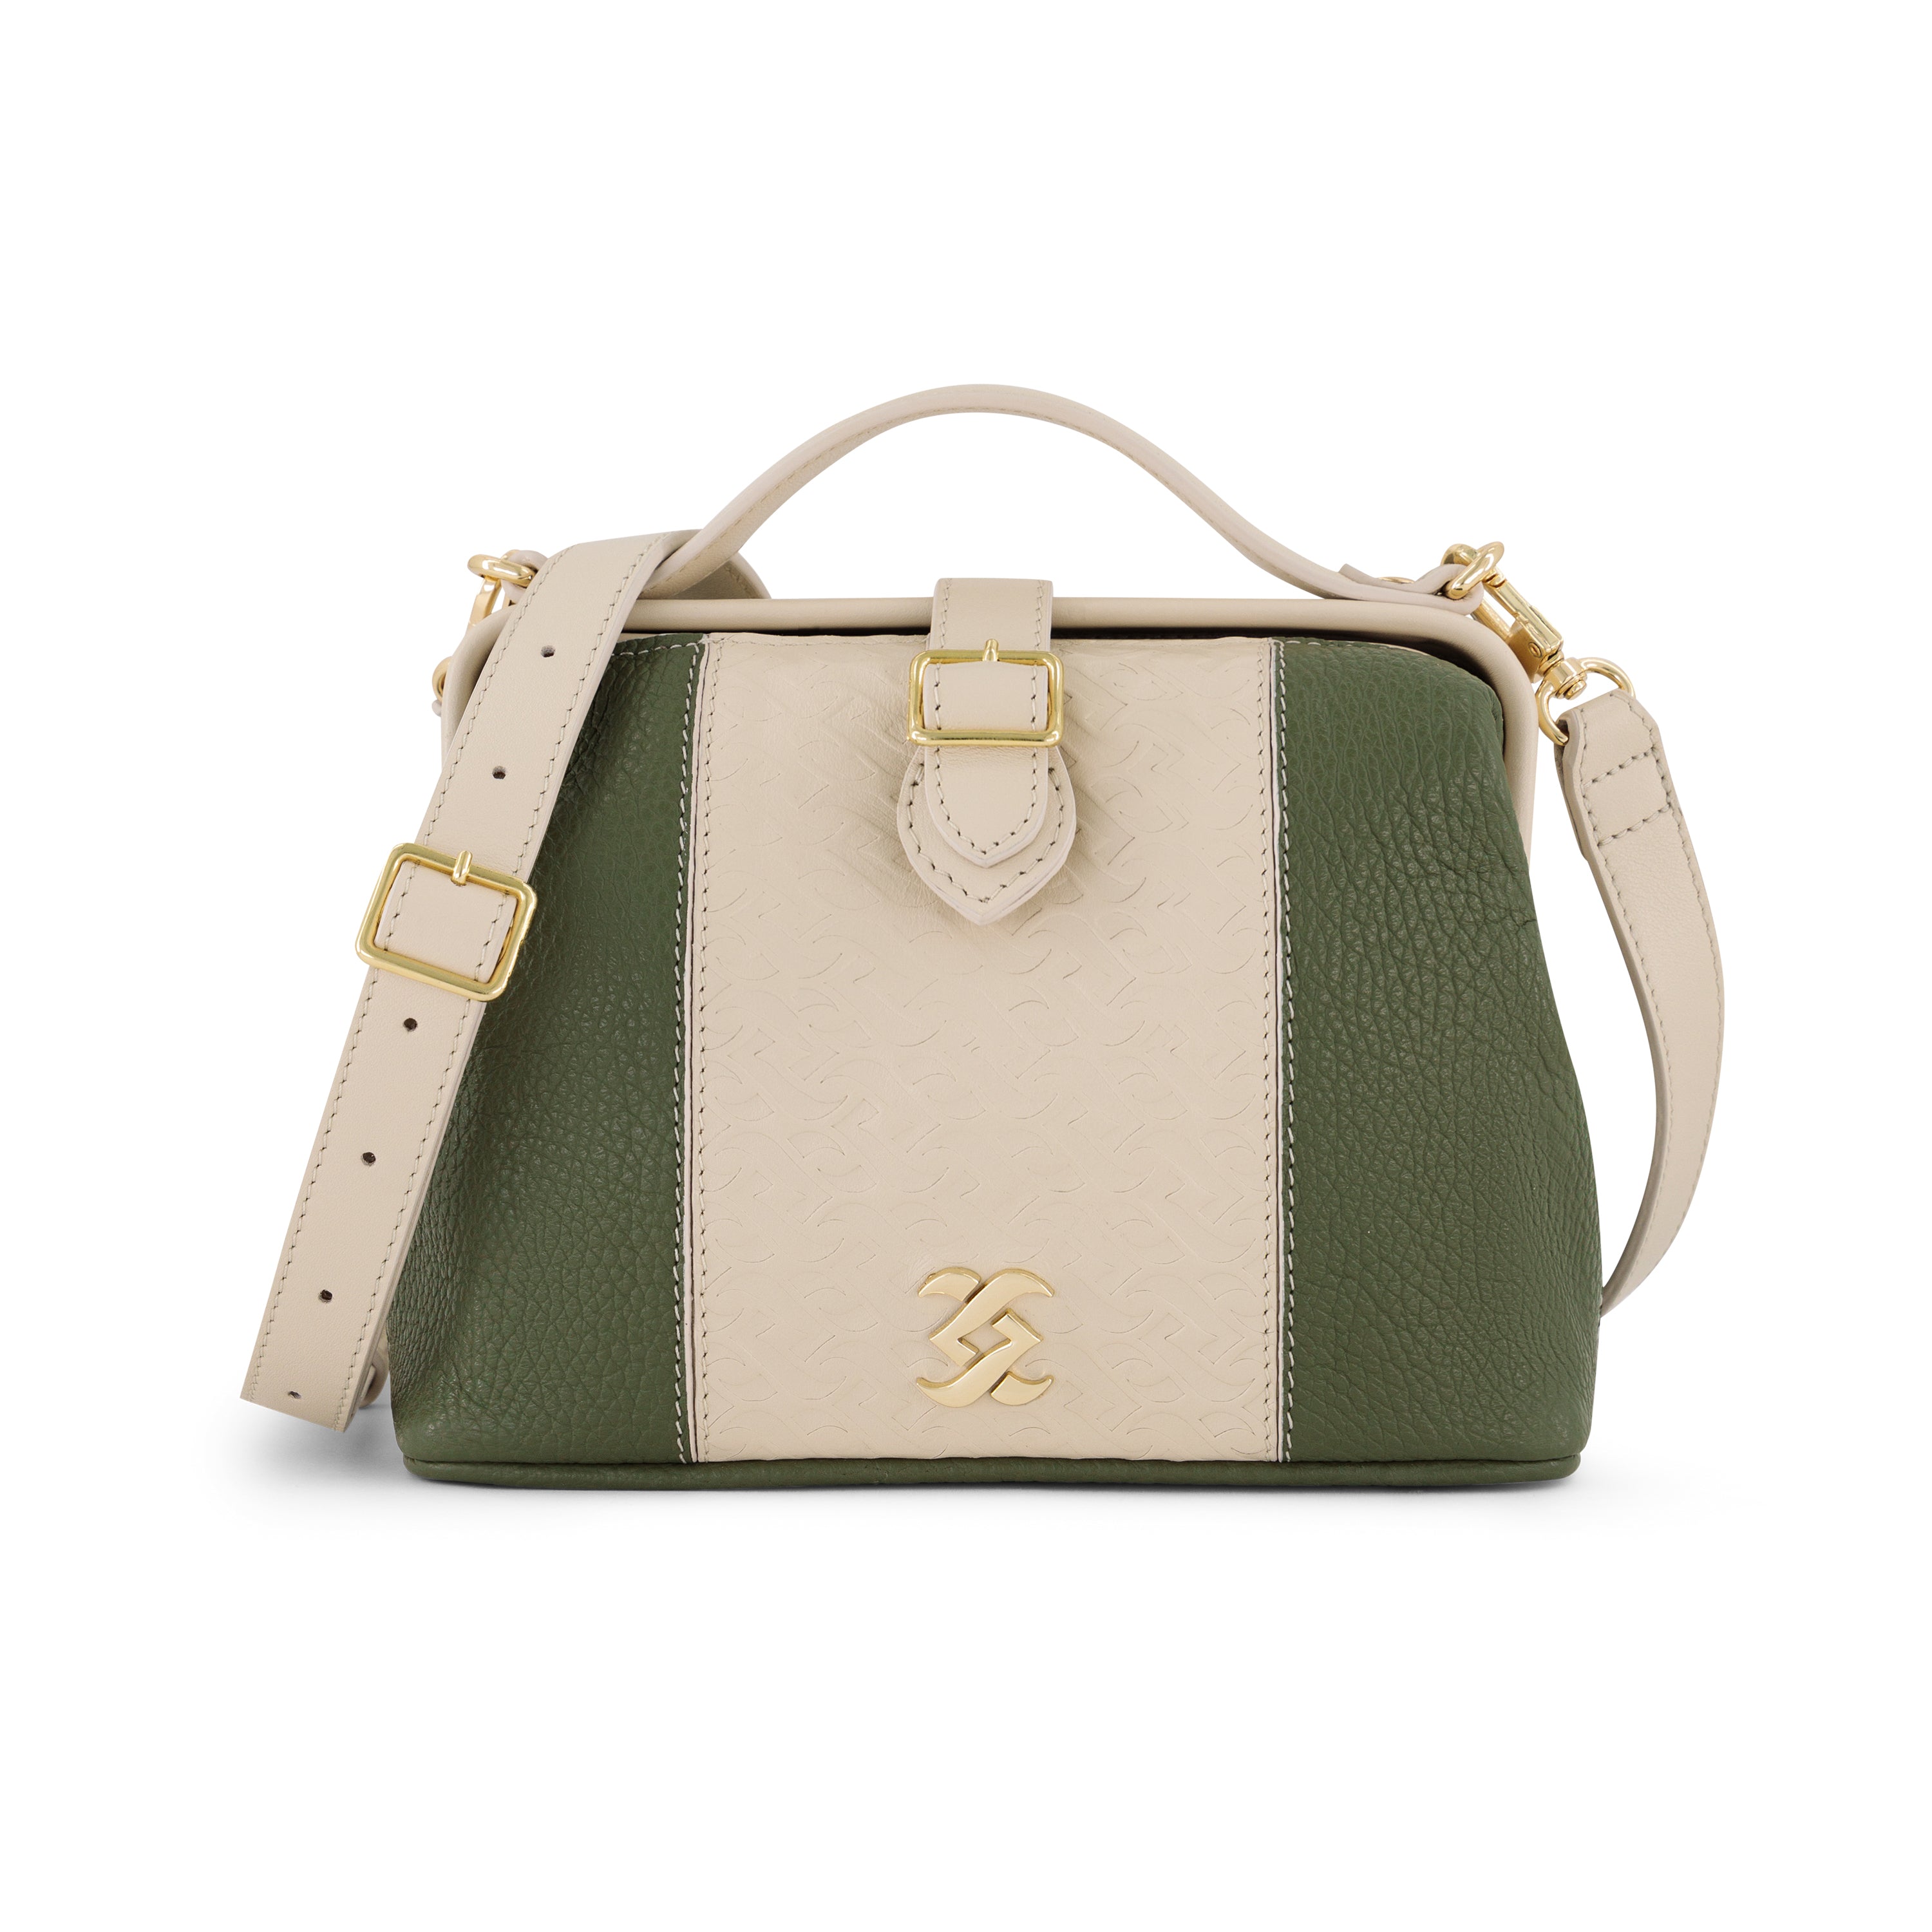 THE SHOULDER HANDMADE BAG CRAFTED FROM GREEN GENUINE LEATHER WITH CLASSY PATTERN